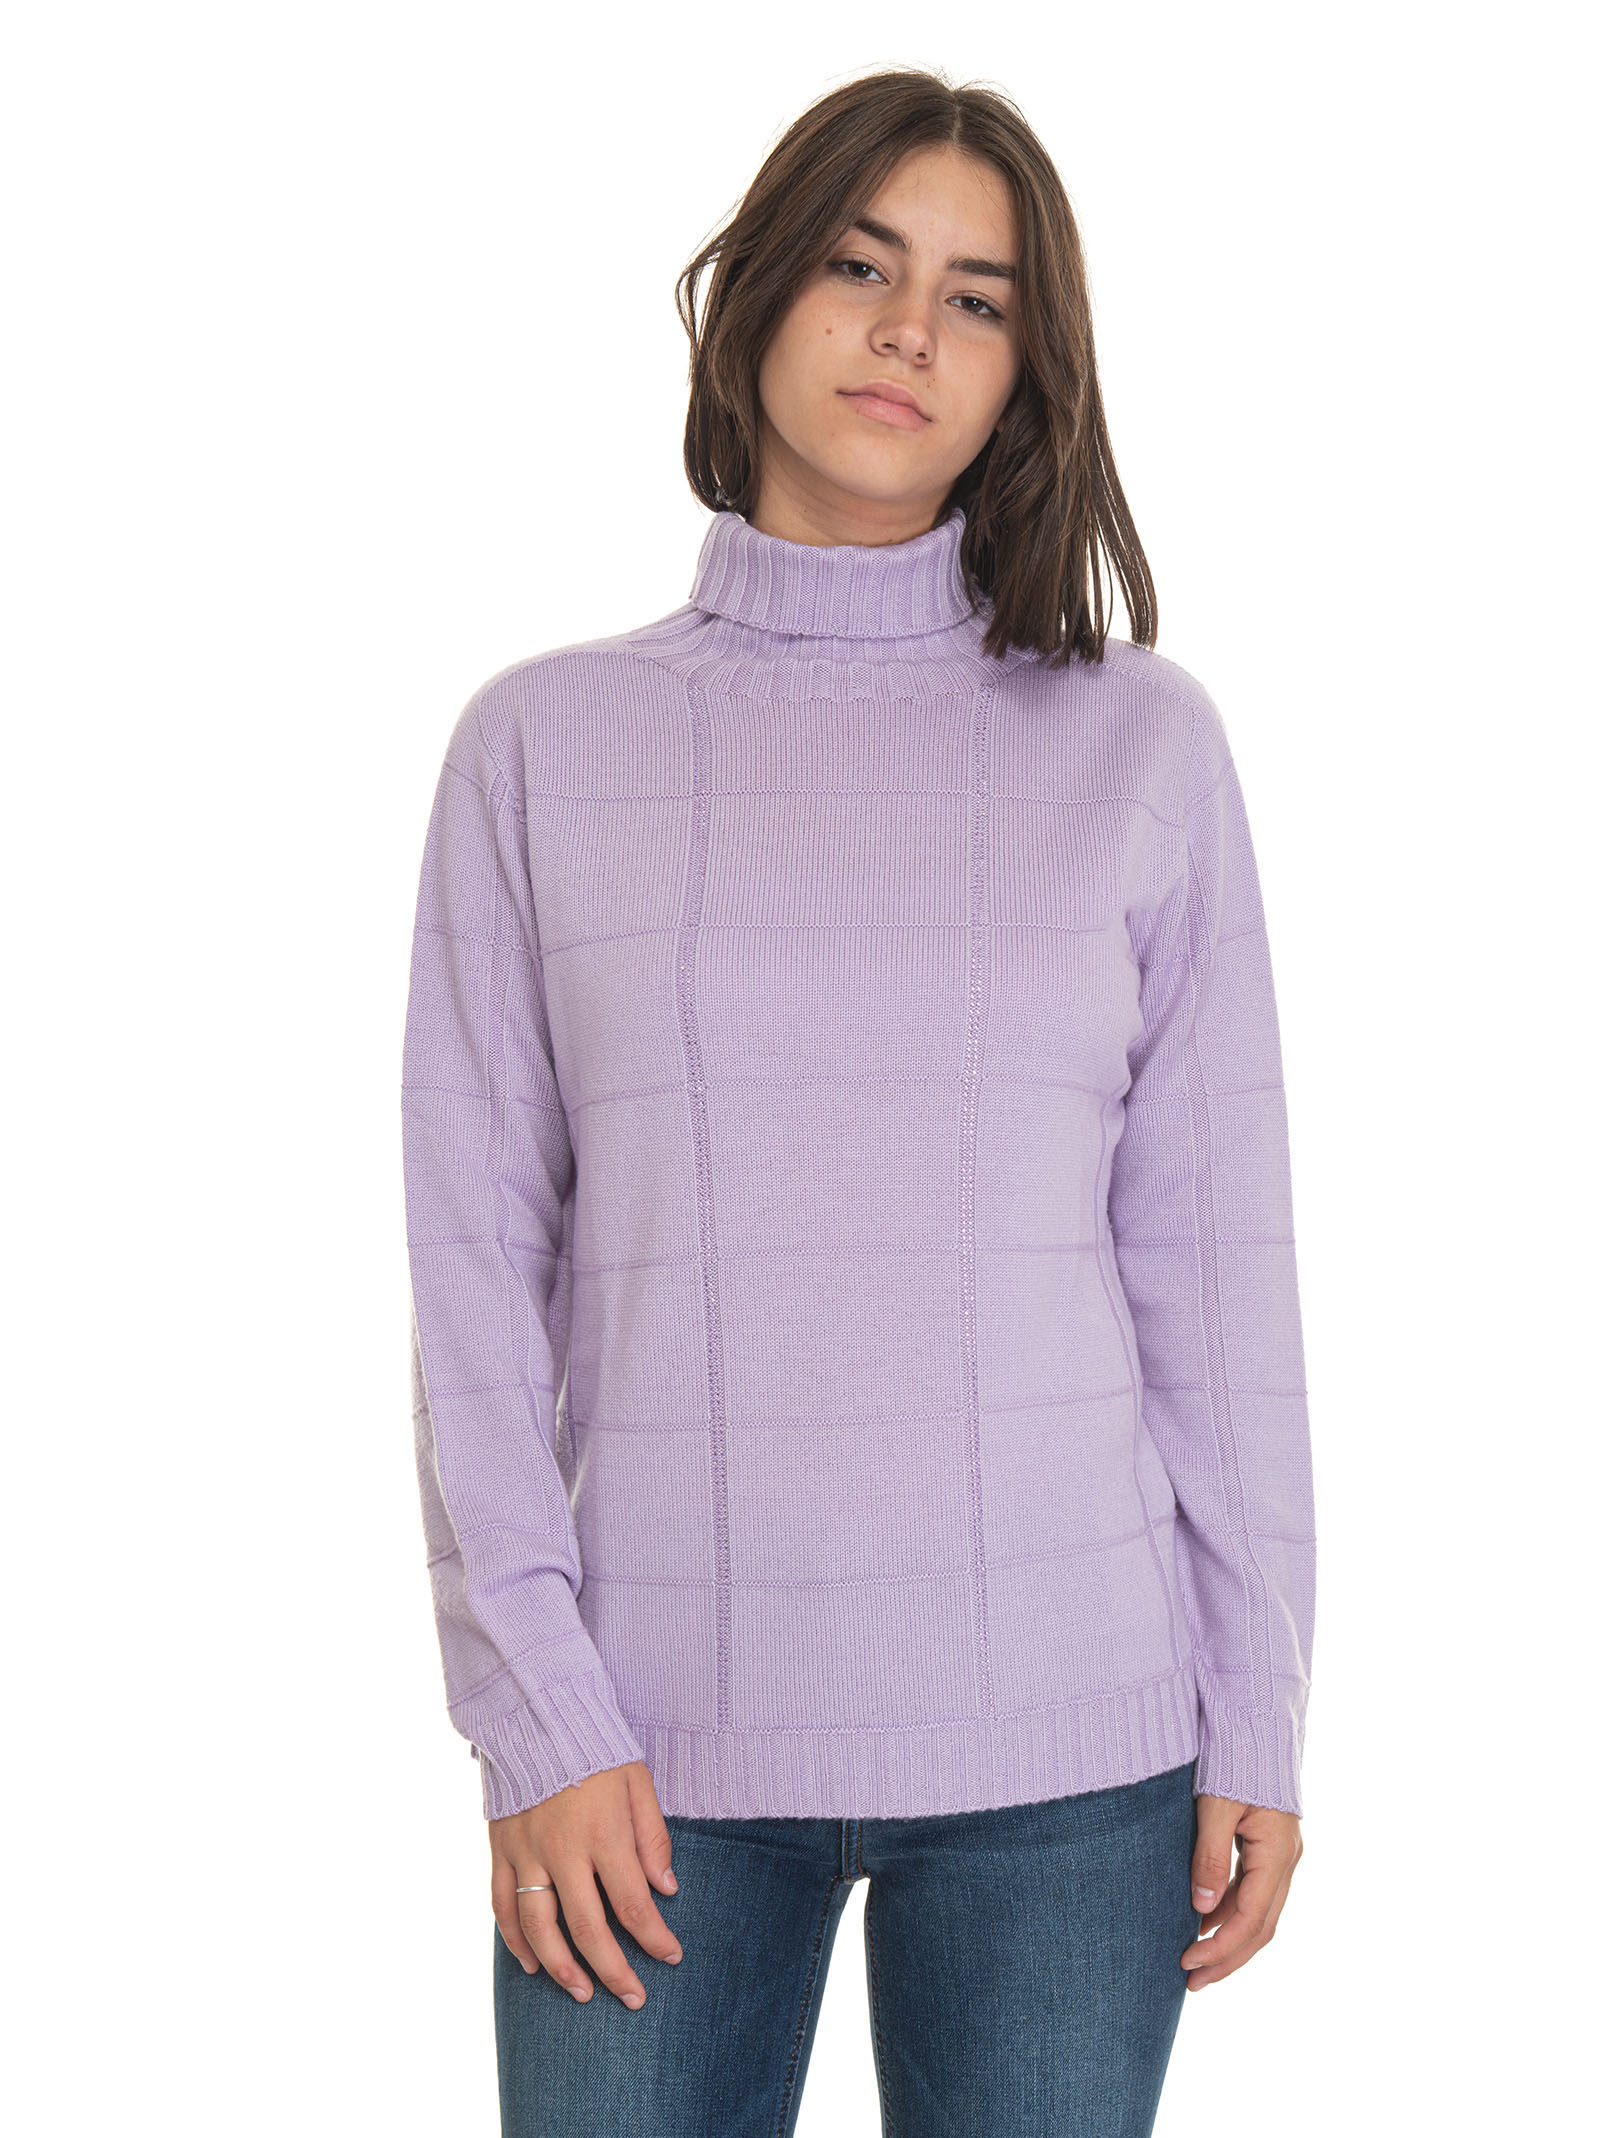 Quality First Wool Jumper In Violet 